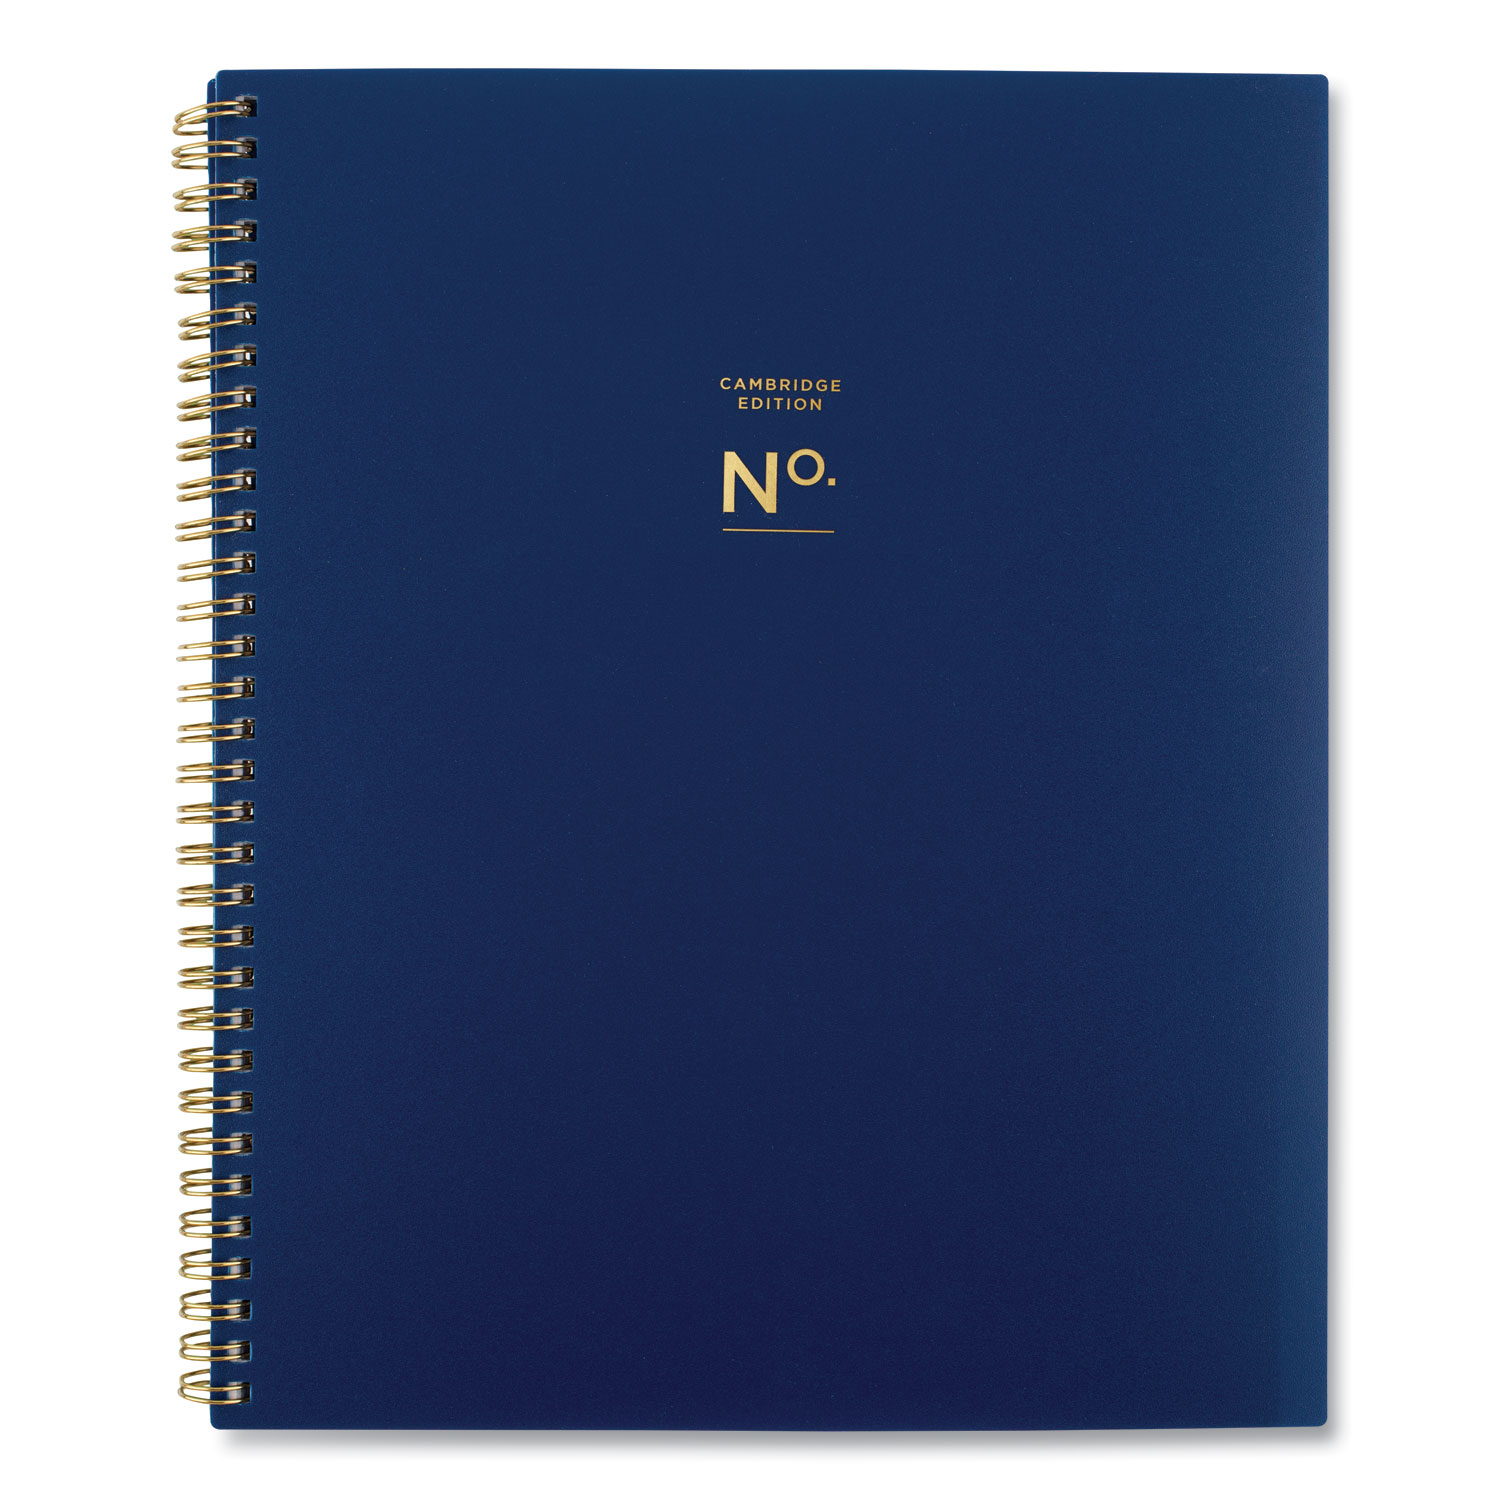  Cambridge 147990558 Workstyle Weekly/Monthly Planner, 11 x 8.5, Navy, 2021 (AAG147990558) 